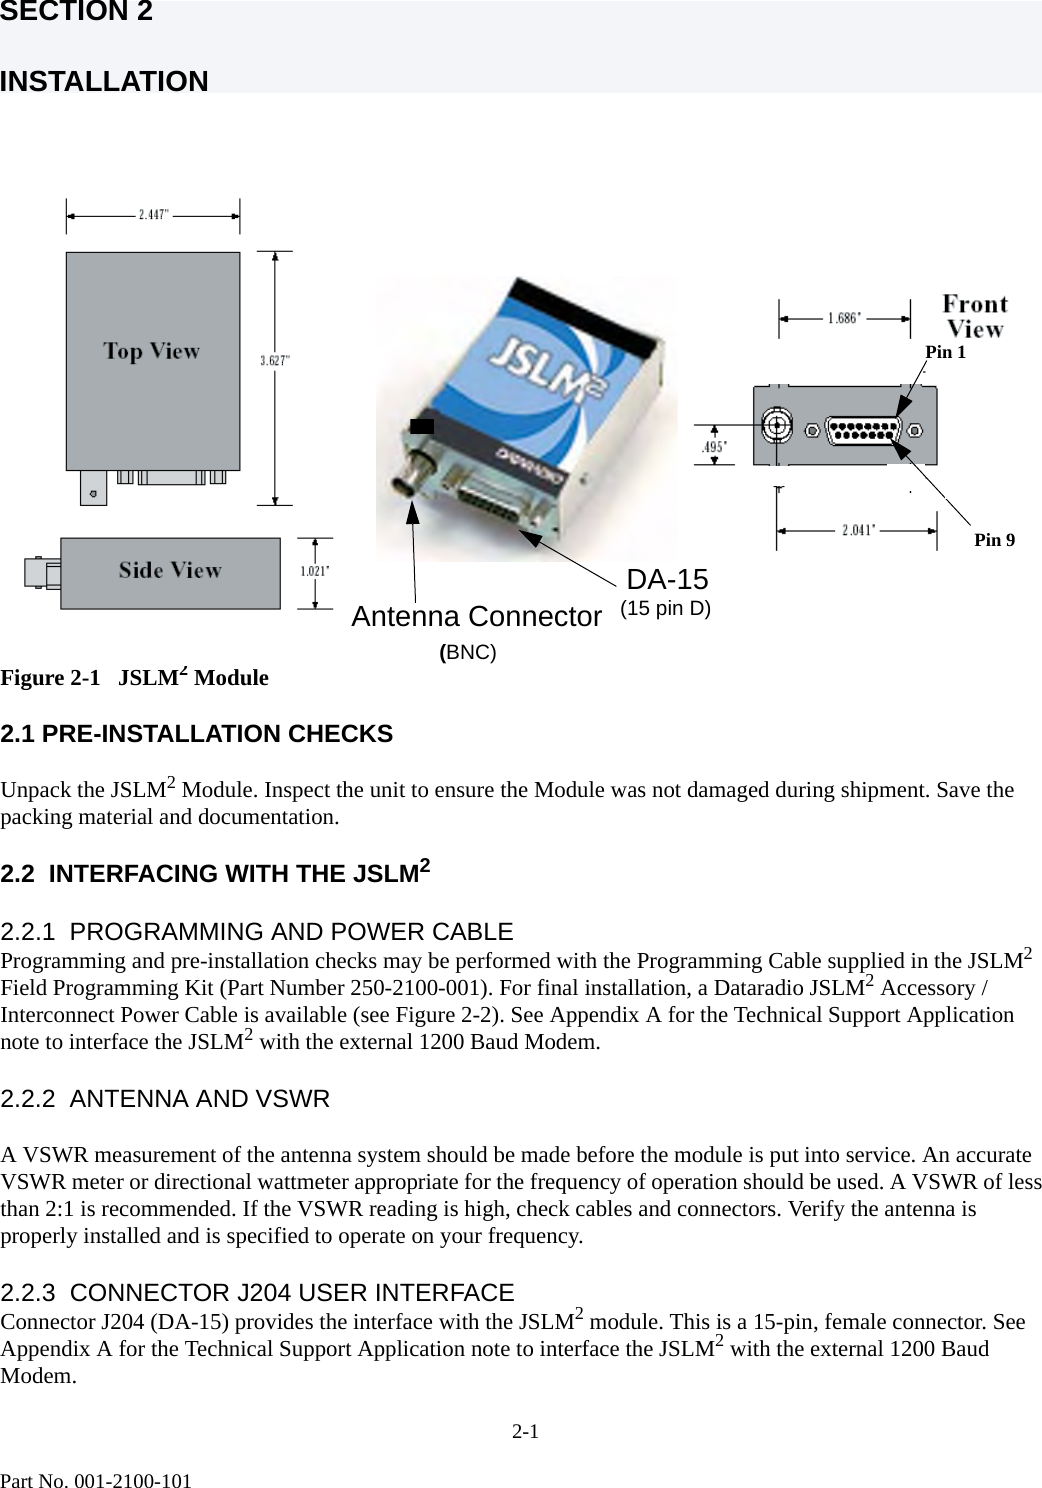 SECTION 2INSTALLATION2-1Part No. 001-2100-101Figure 2-1   JSLM2 Module 2.1 PRE-INSTALLATION CHECKSUnpack the JSLM2 Module. Inspect the unit to ensure the Module was not damaged during shipment. Save the packing material and documentation.2.2  INTERFACING WITH THE JSLM22.2.1  PROGRAMMING AND POWER CABLE   Programming and pre-installation checks may be performed with the Programming Cable supplied in the JSLM2 Field Programming Kit (Part Number 250-2100-001). For final installation, a Dataradio JSLM2 Accessory / Interconnect Power Cable is available (see Figure 2-2). See Appendix A for the Technical Support Application note to interface the JSLM2 with the external 1200 Baud Modem.2.2.2  ANTENNA AND VSWRA VSWR measurement of the antenna system should be made before the module is put into service. An accurate VSWR meter or directional wattmeter appropriate for the frequency of operation should be used. A VSWR of less than 2:1 is recommended. If the VSWR reading is high, check cables and connectors. Verify the antenna is properly installed and is specified to operate on your frequency.2.2.3  CONNECTOR J204 USER INTERFACEConnector J204 (DA-15) provides the interface with the JSLM2 module. This is a 15-pin, female connector. See Appendix A for the Technical Support Application note to interface the JSLM2 with the external 1200 Baud Modem.  Antenna Connector   DA-15   (15 pin D)      (BNC)Pin 9Pin 1